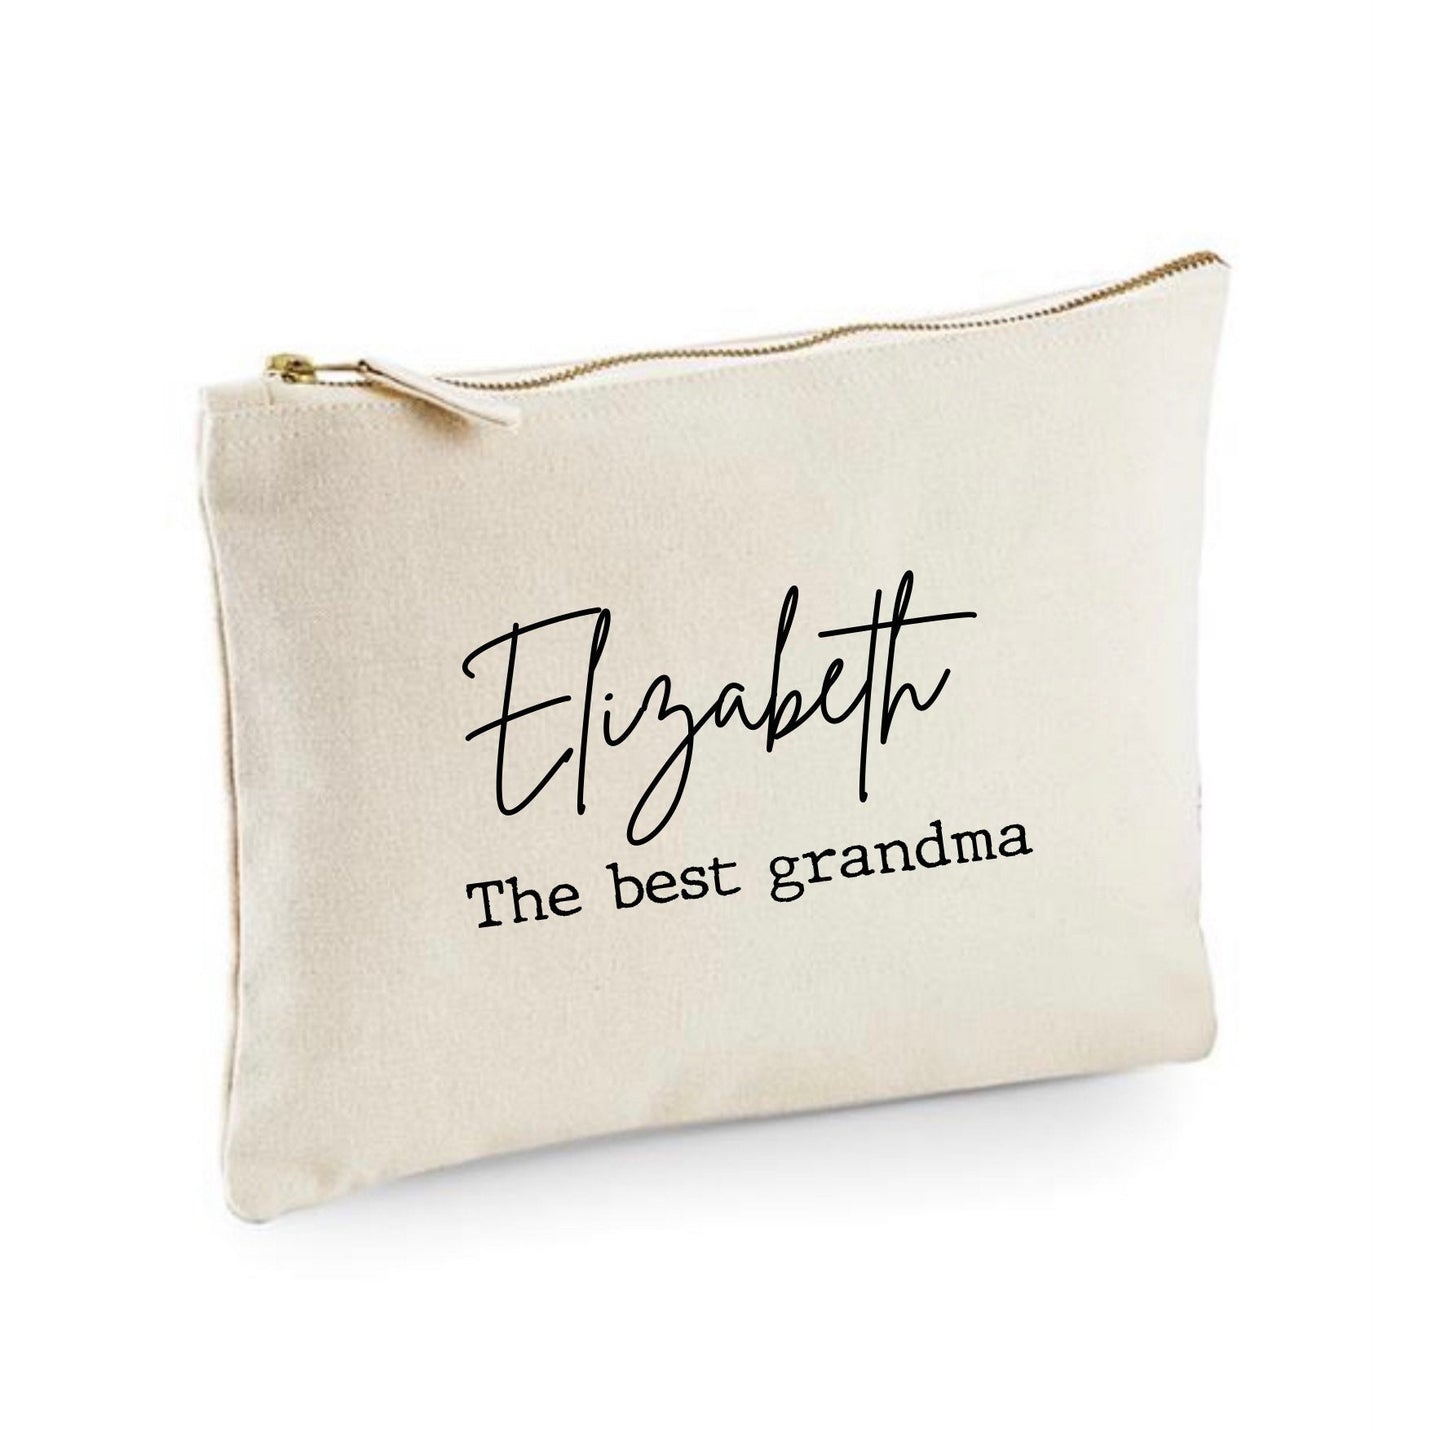 The Best Grandma Gift, personalised Christmas gift for nan, nanny, grandma from grandchildren. Nan sweet pouch, perfume pouch, travel case